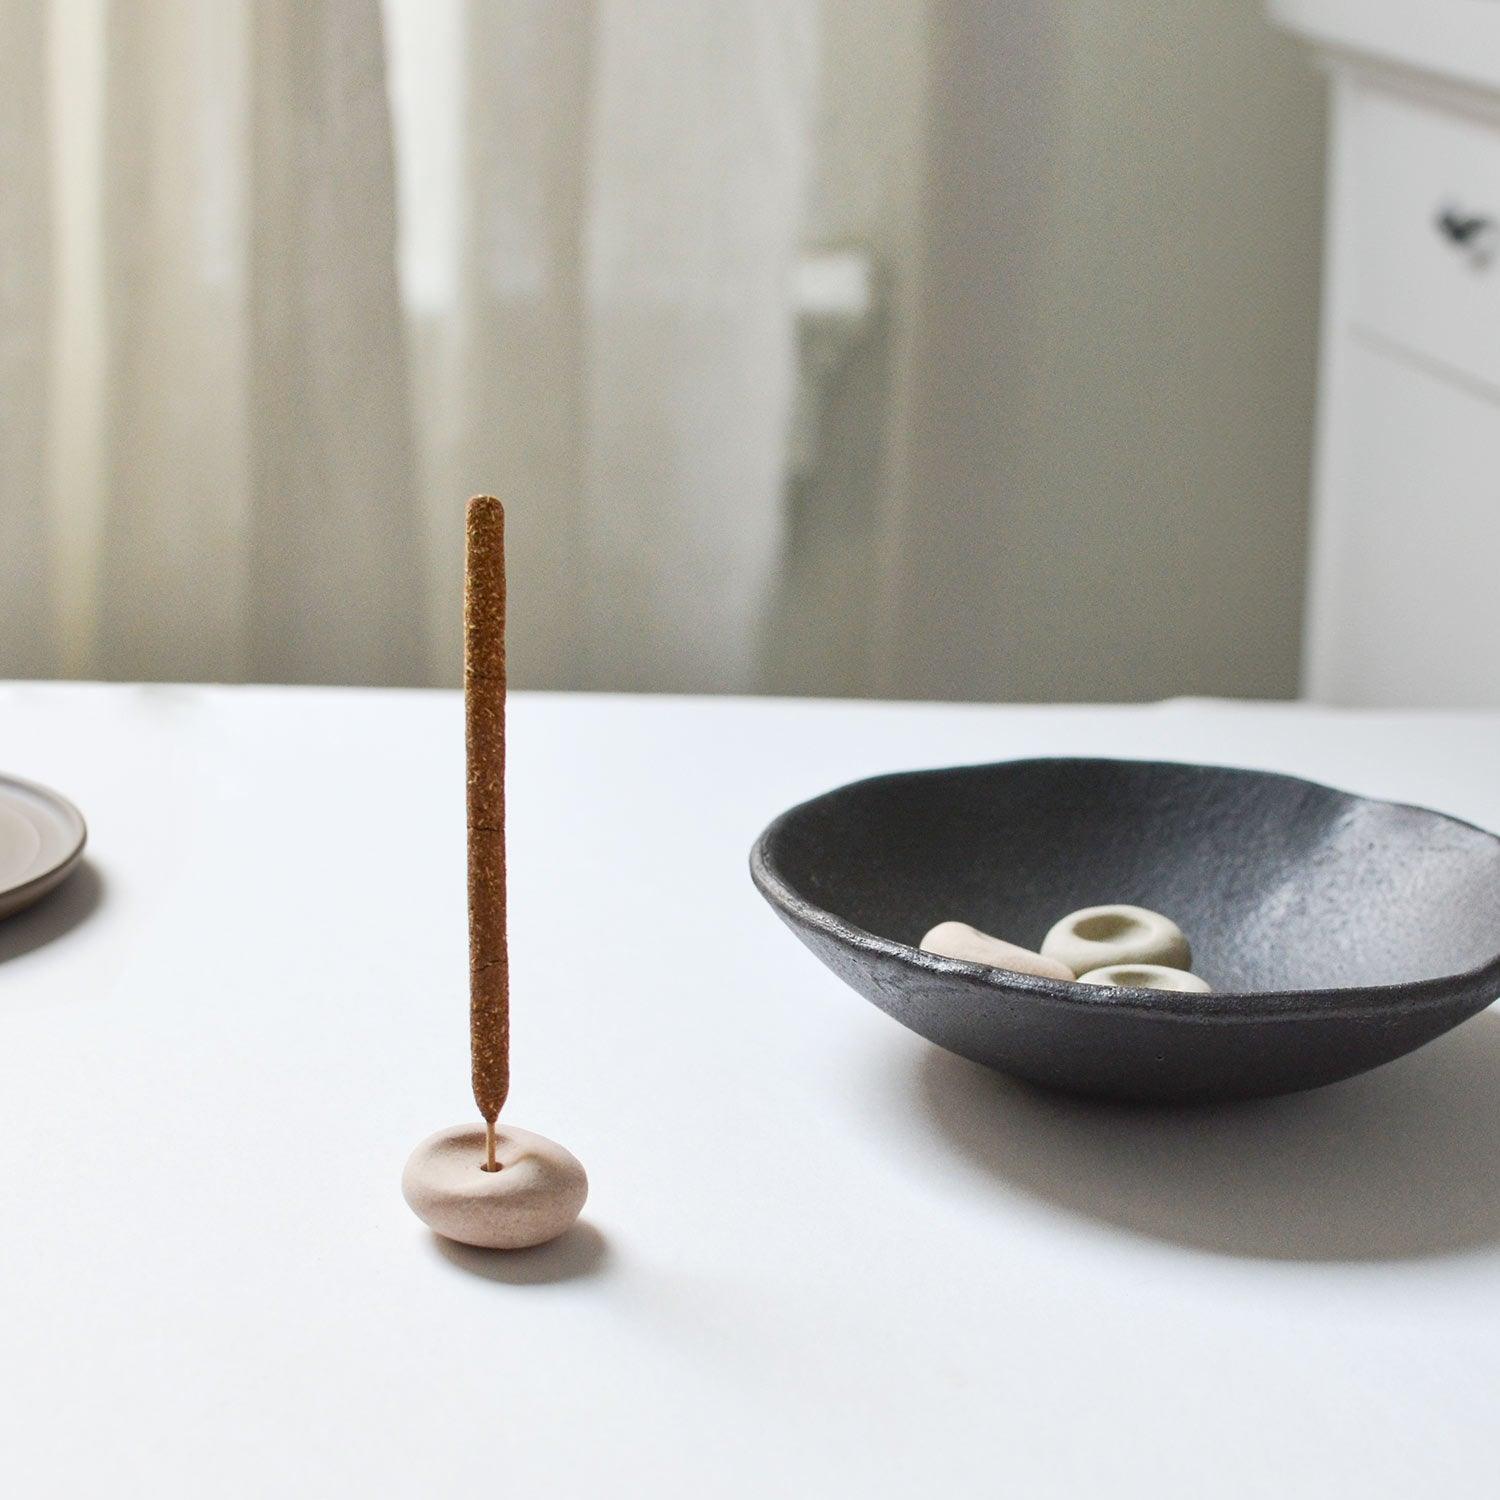 left: mini incense stick with mini incense holder beige pebble, Right: 3 pebble-shaped incense holders on the incense bowl